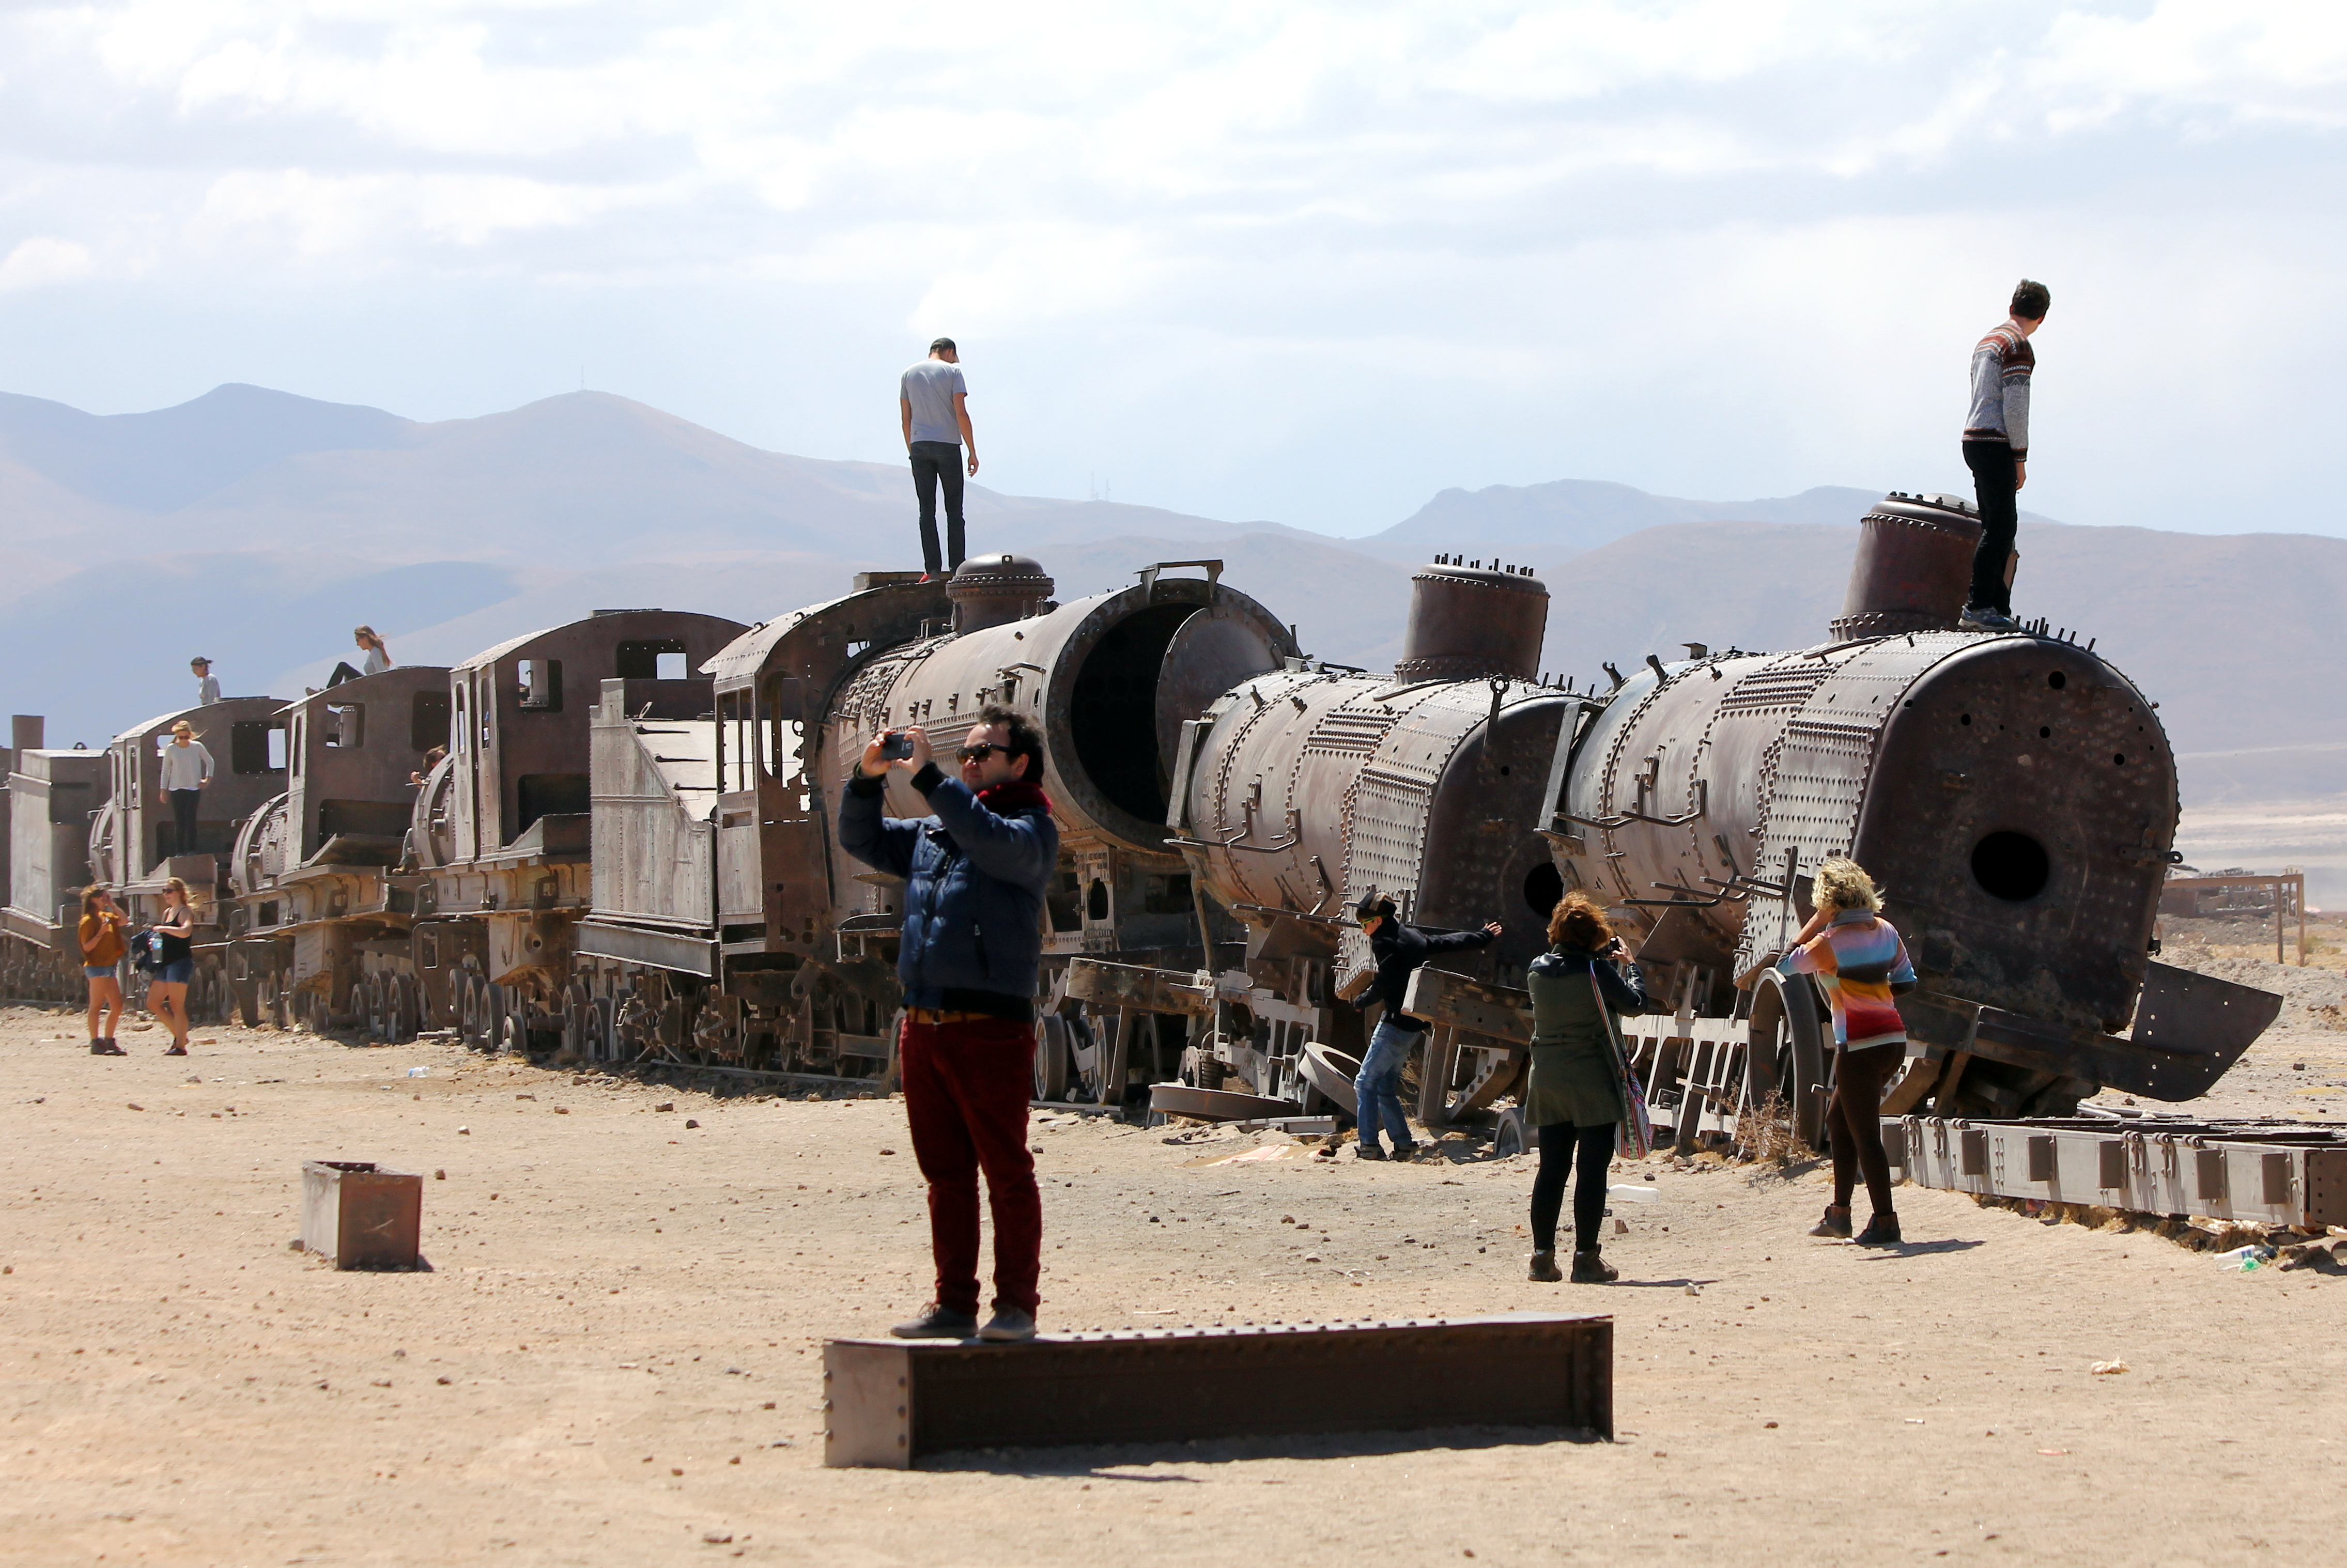 The Train Cemetery on the outskirts of Uyuni, southern Bolivia. September 3, 2015.